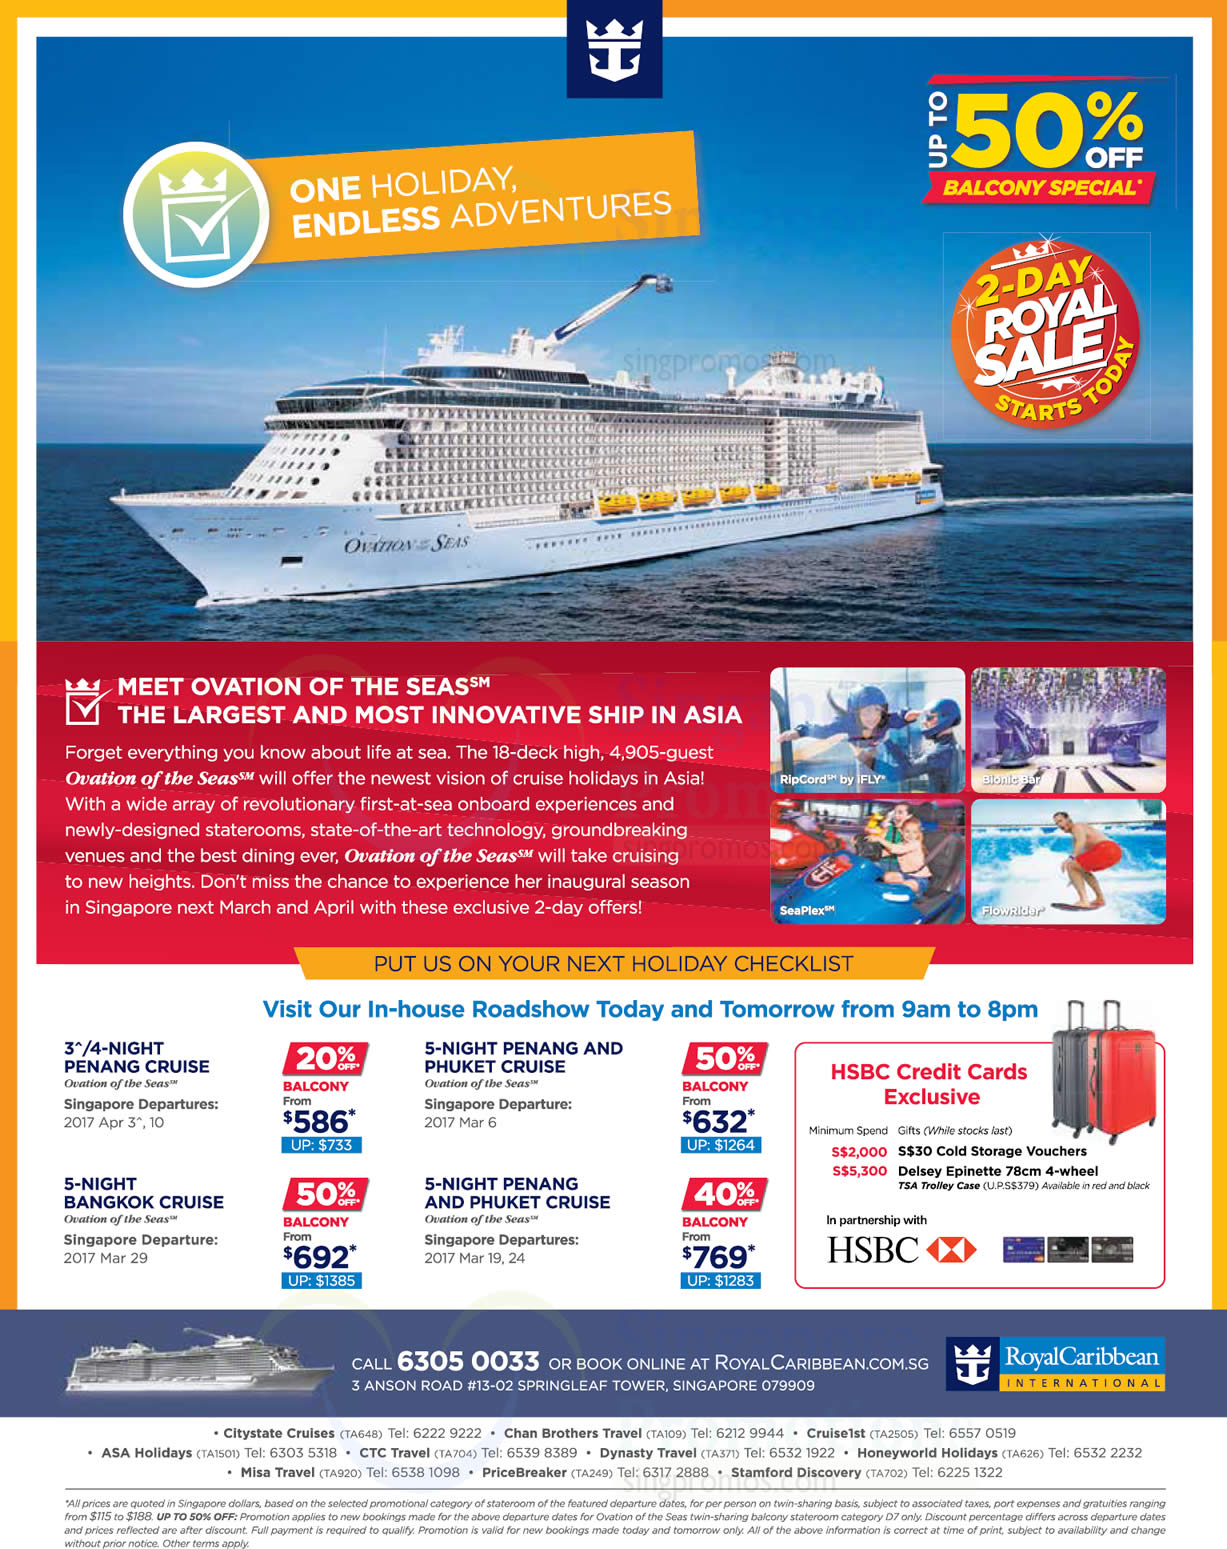 Royal Caribbean’s 48hr royal sale offers up to 50% off selected balcony